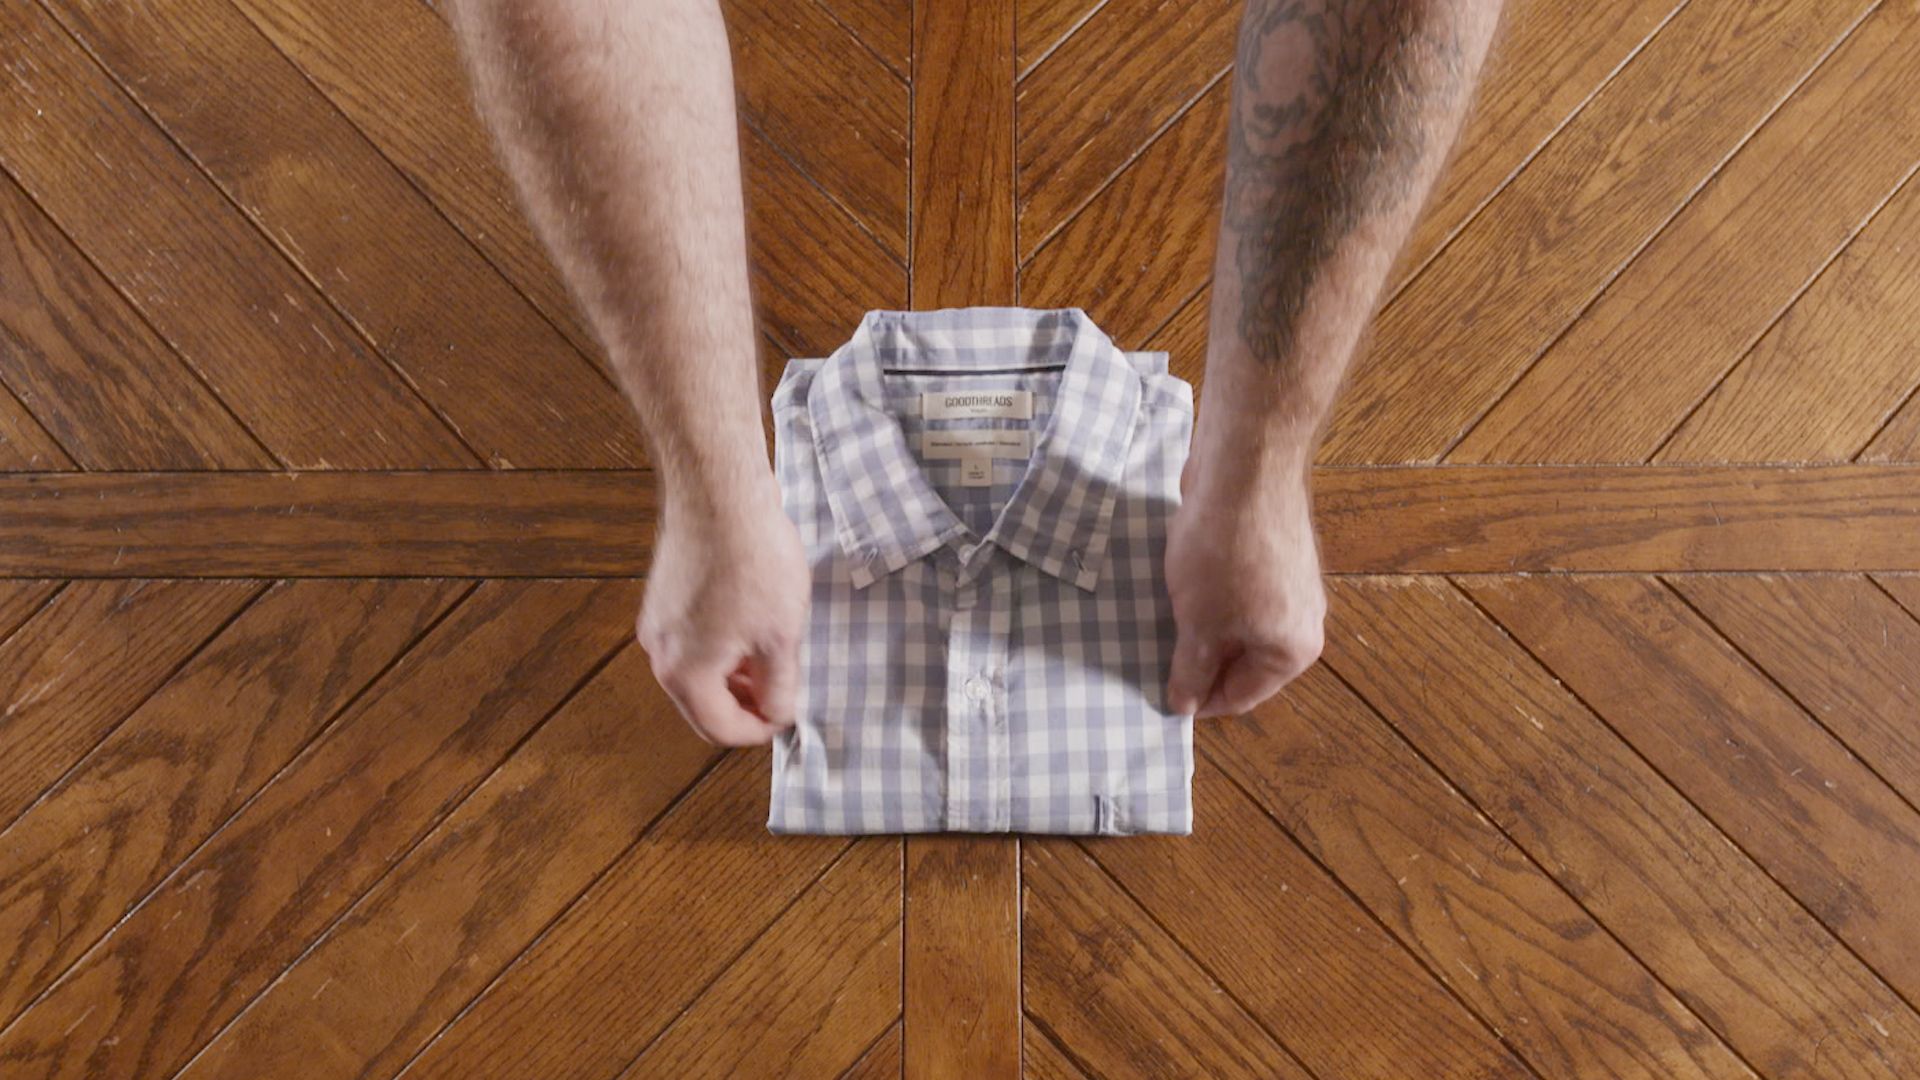 How to Fold a Shirt Five Different Ways